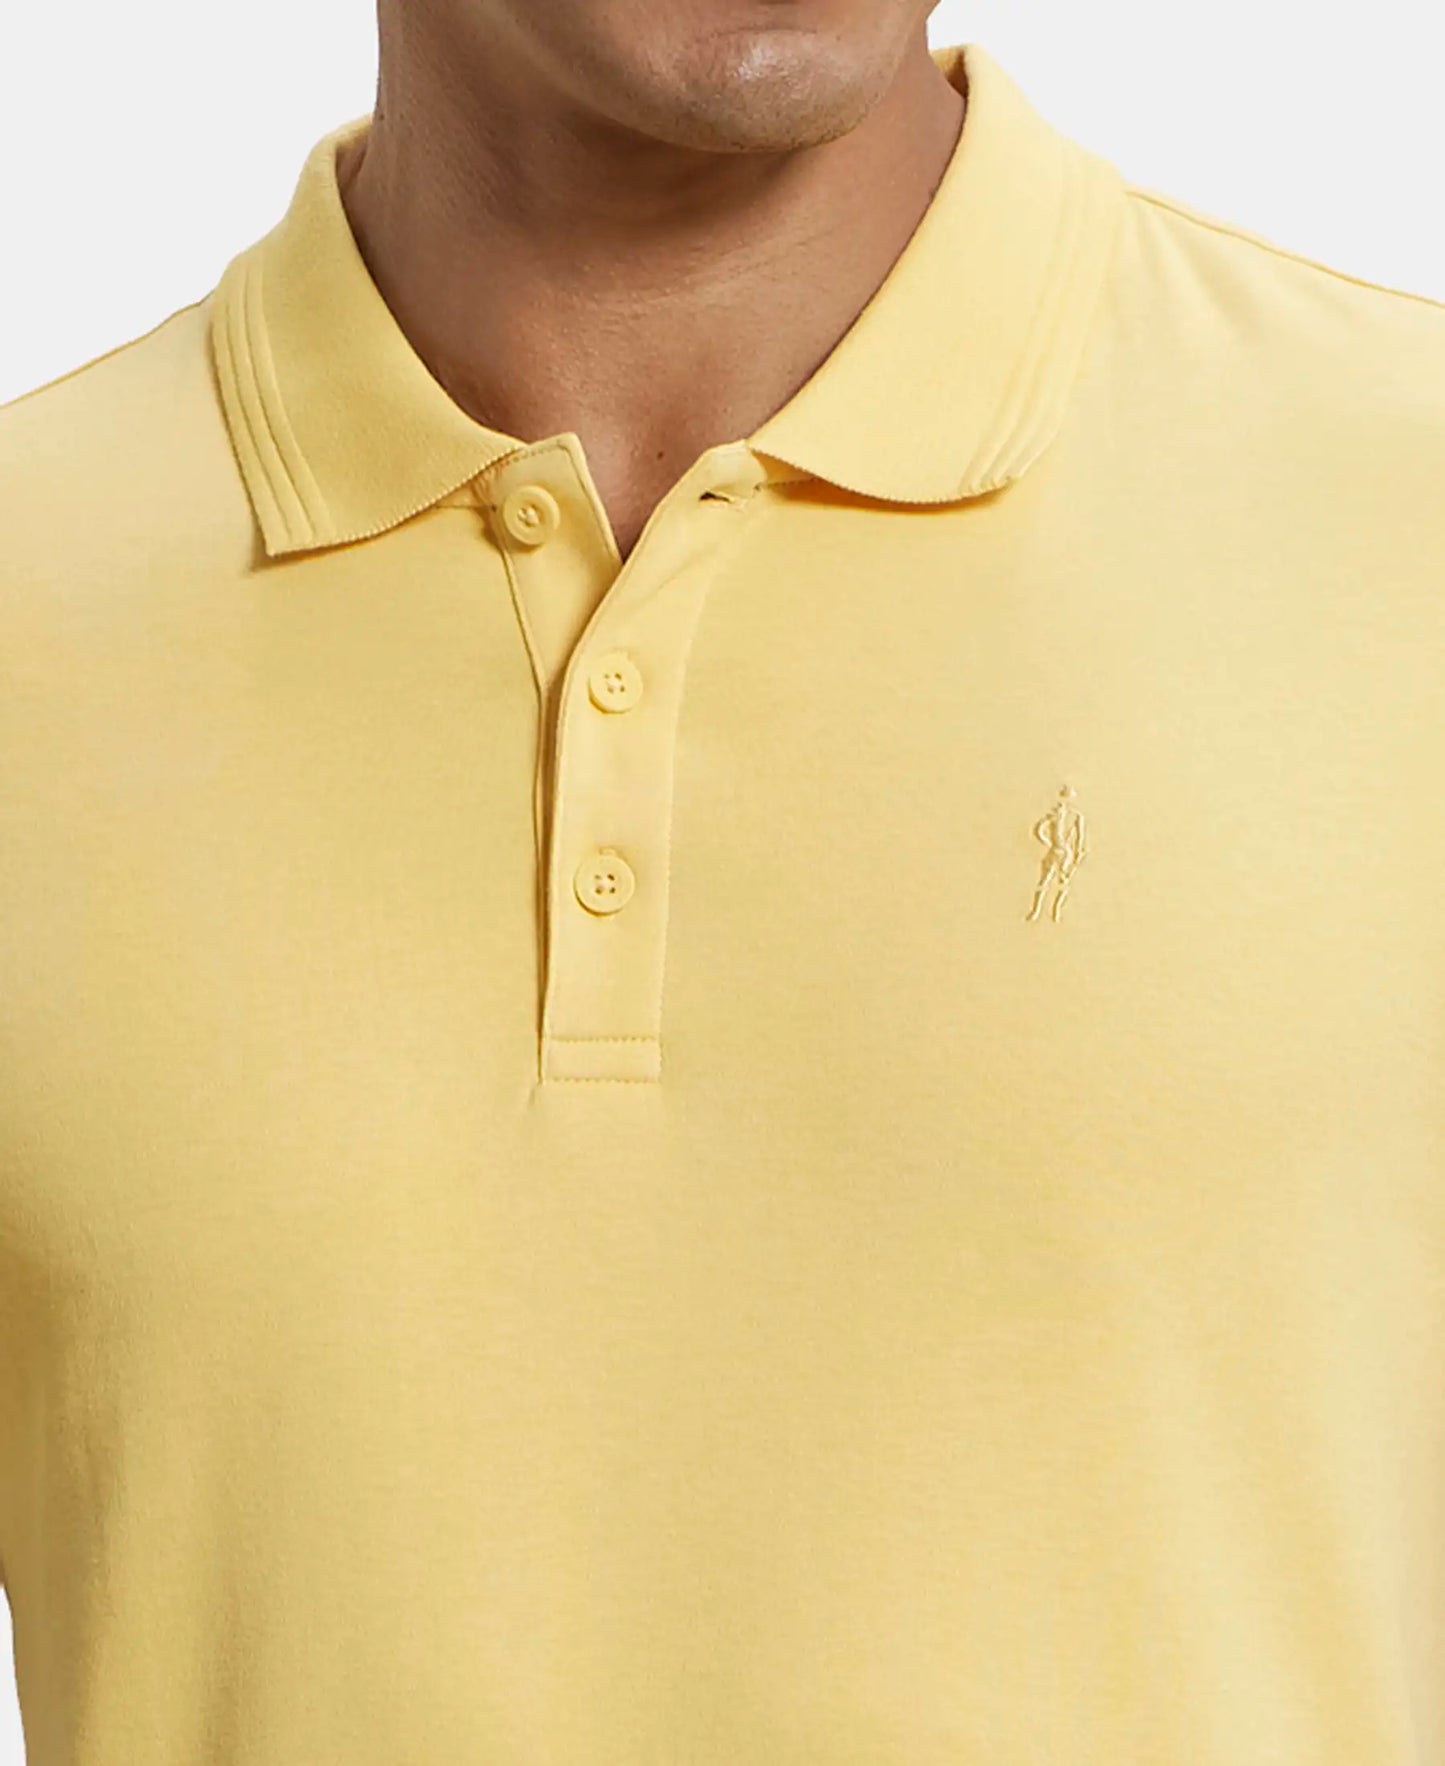 Super Combed Cotton Rich Solid Half Sleeve Polo T-Shirt - Corn Silk-6